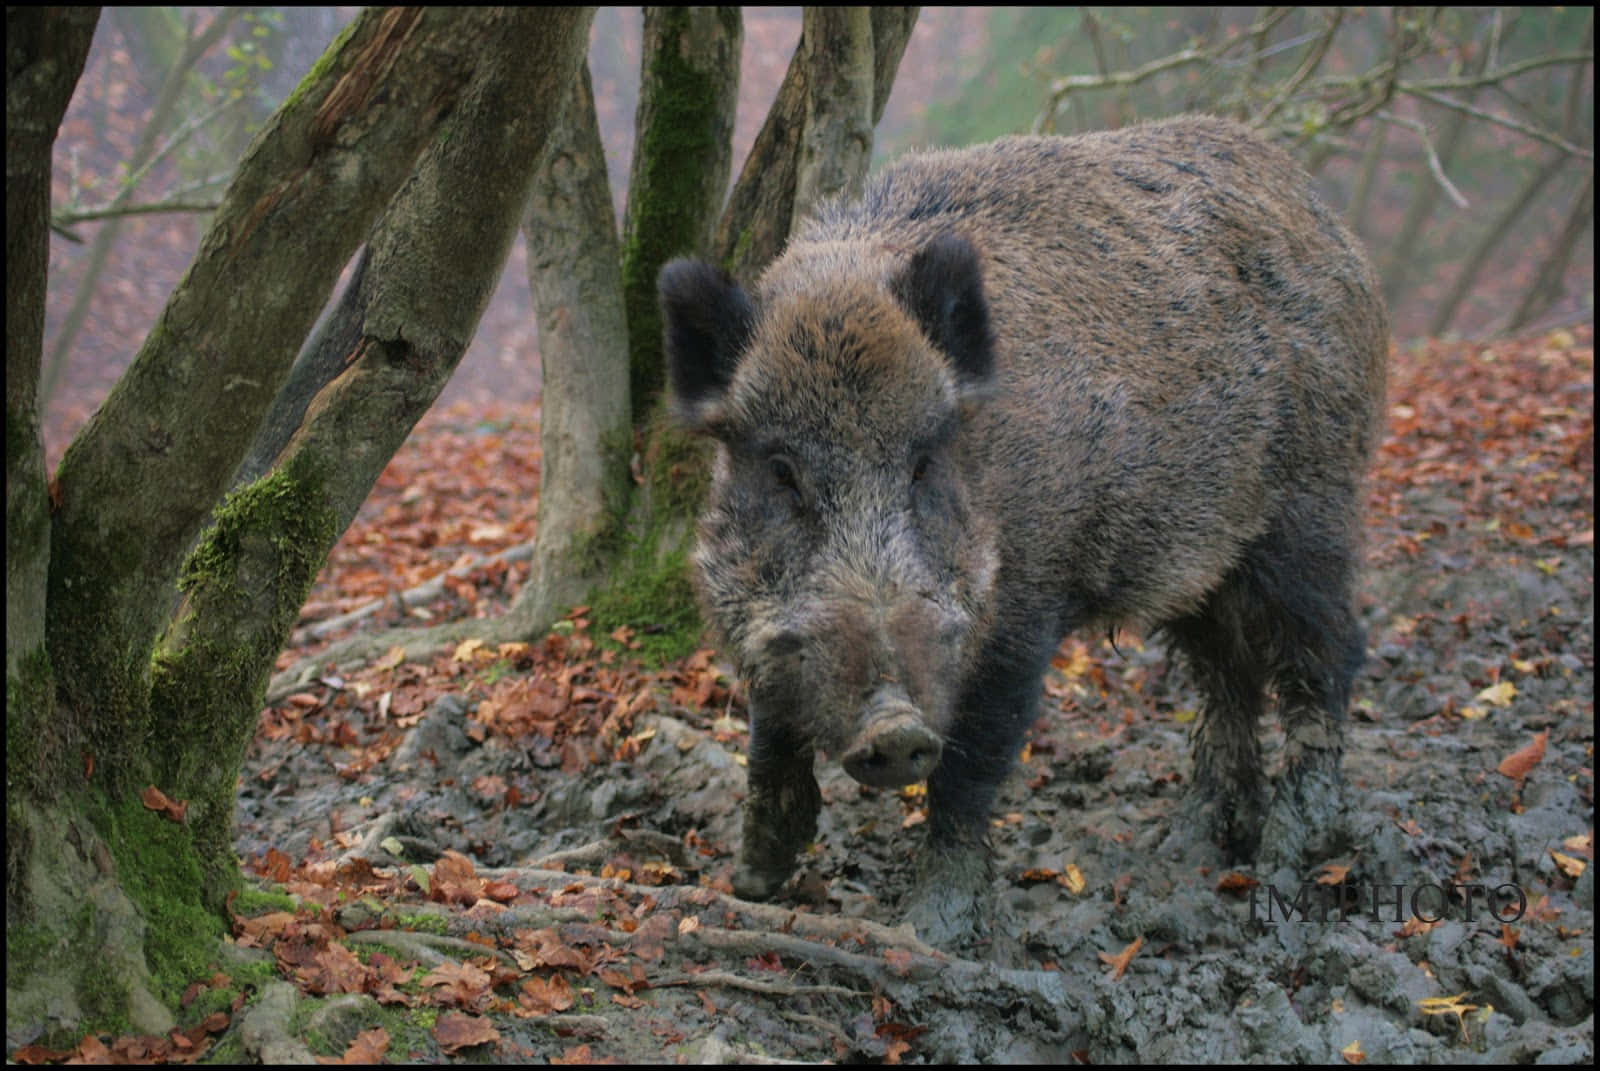 A group of wild boar hogs against a backdrop of tall trees